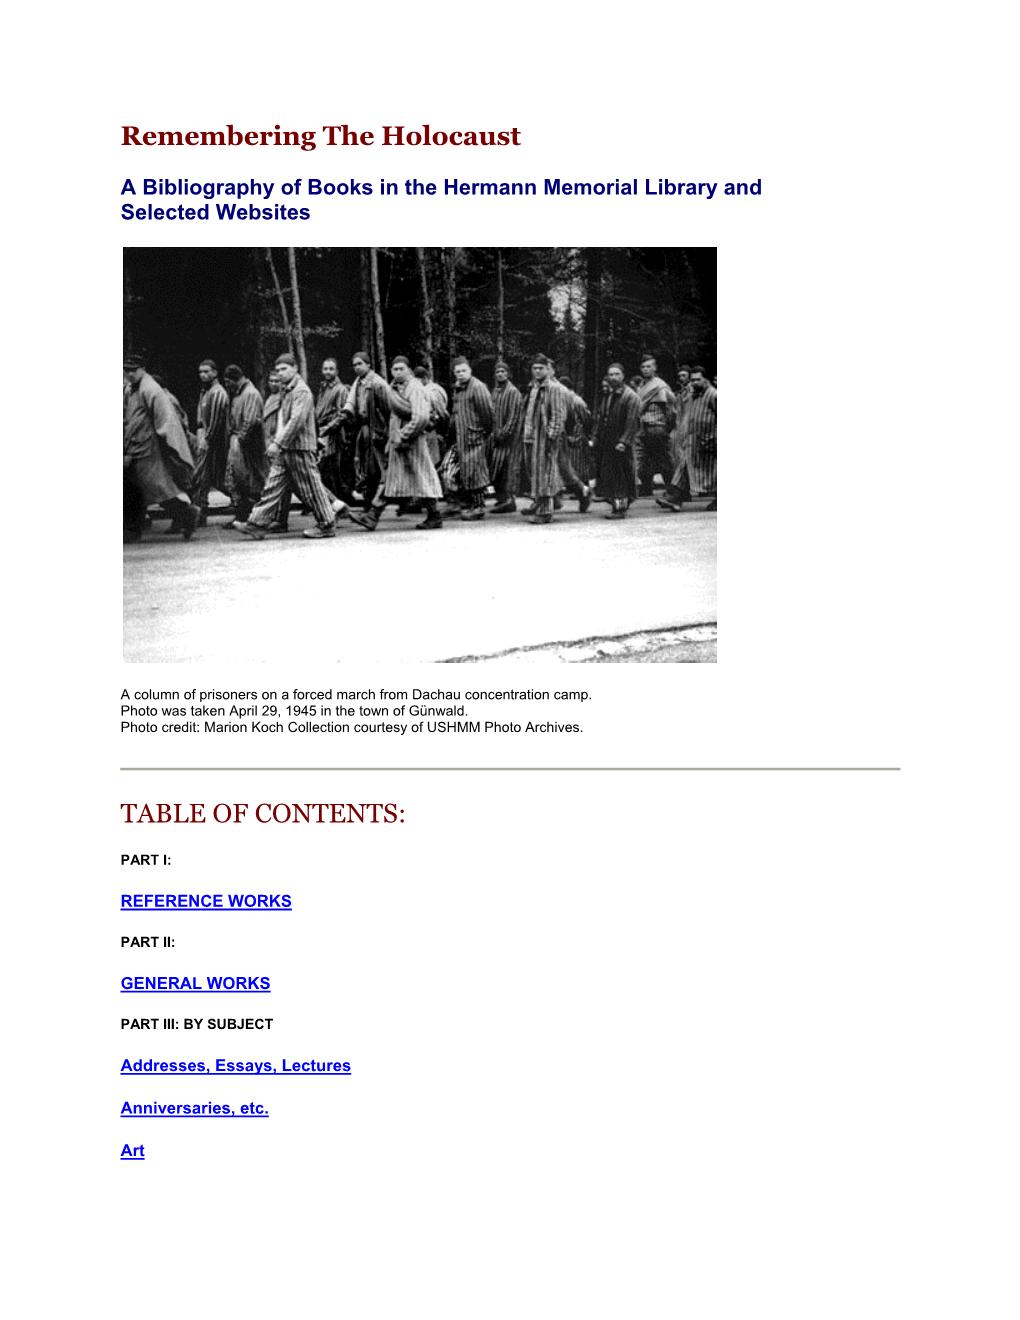 Remembering the Holocaust TABLE of CONTENTS